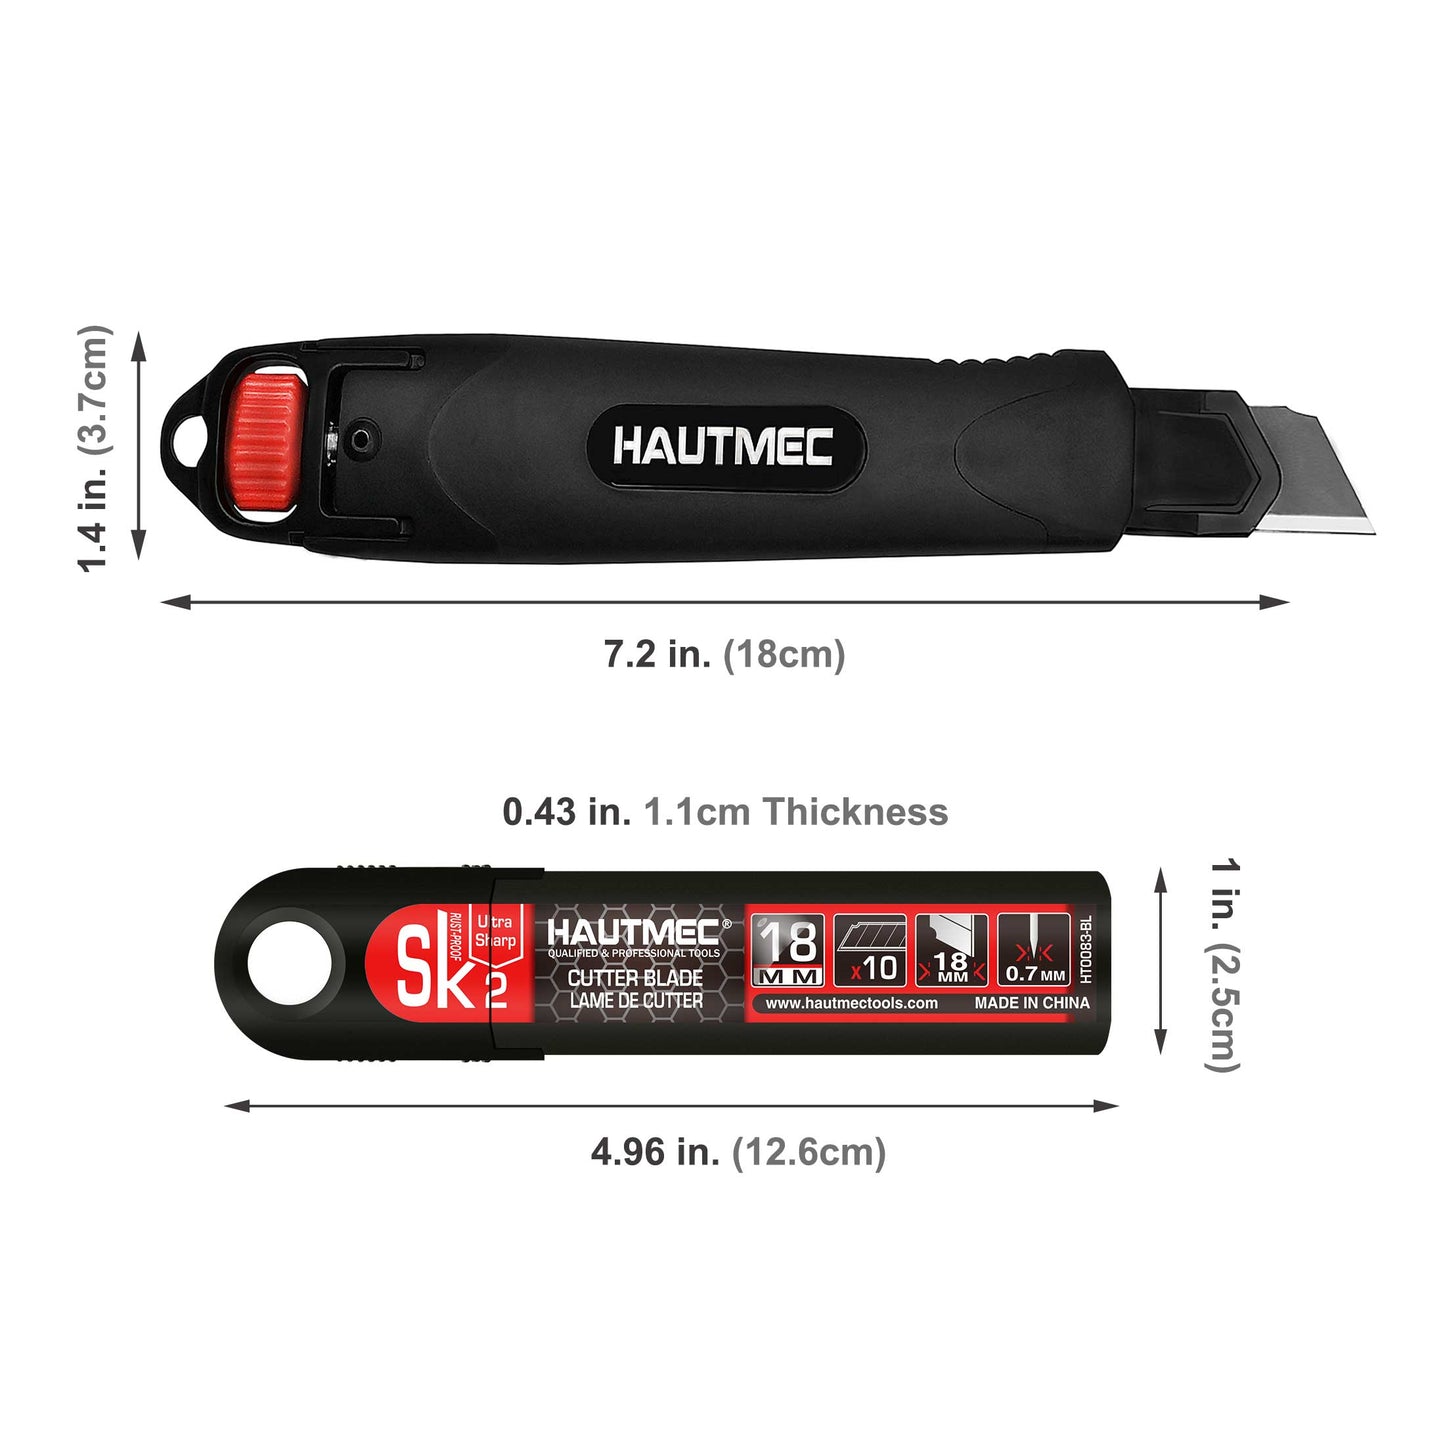 HAUTMEC Professional Safety 18mm Heavy-Duty Utility Knife with Red Secure Knob and 10pc Blade Set HT0153-KN